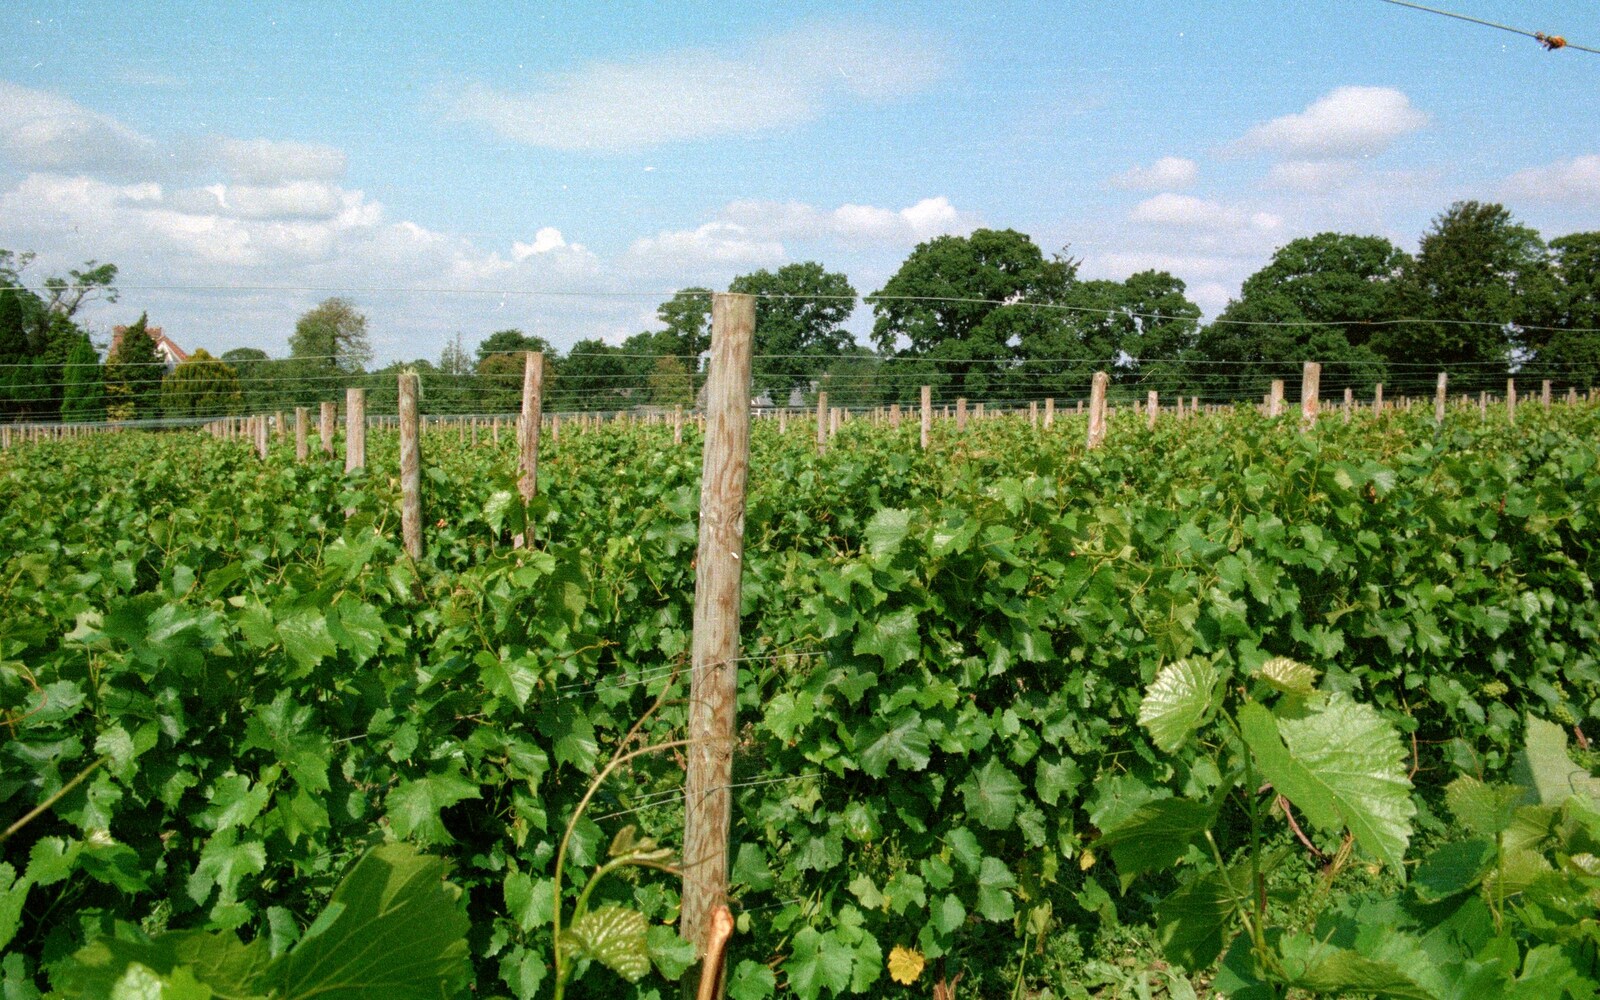 The vines of Harrow from A Vineyard Miscellany, Bransgore and the New Forest - 18th July 1986